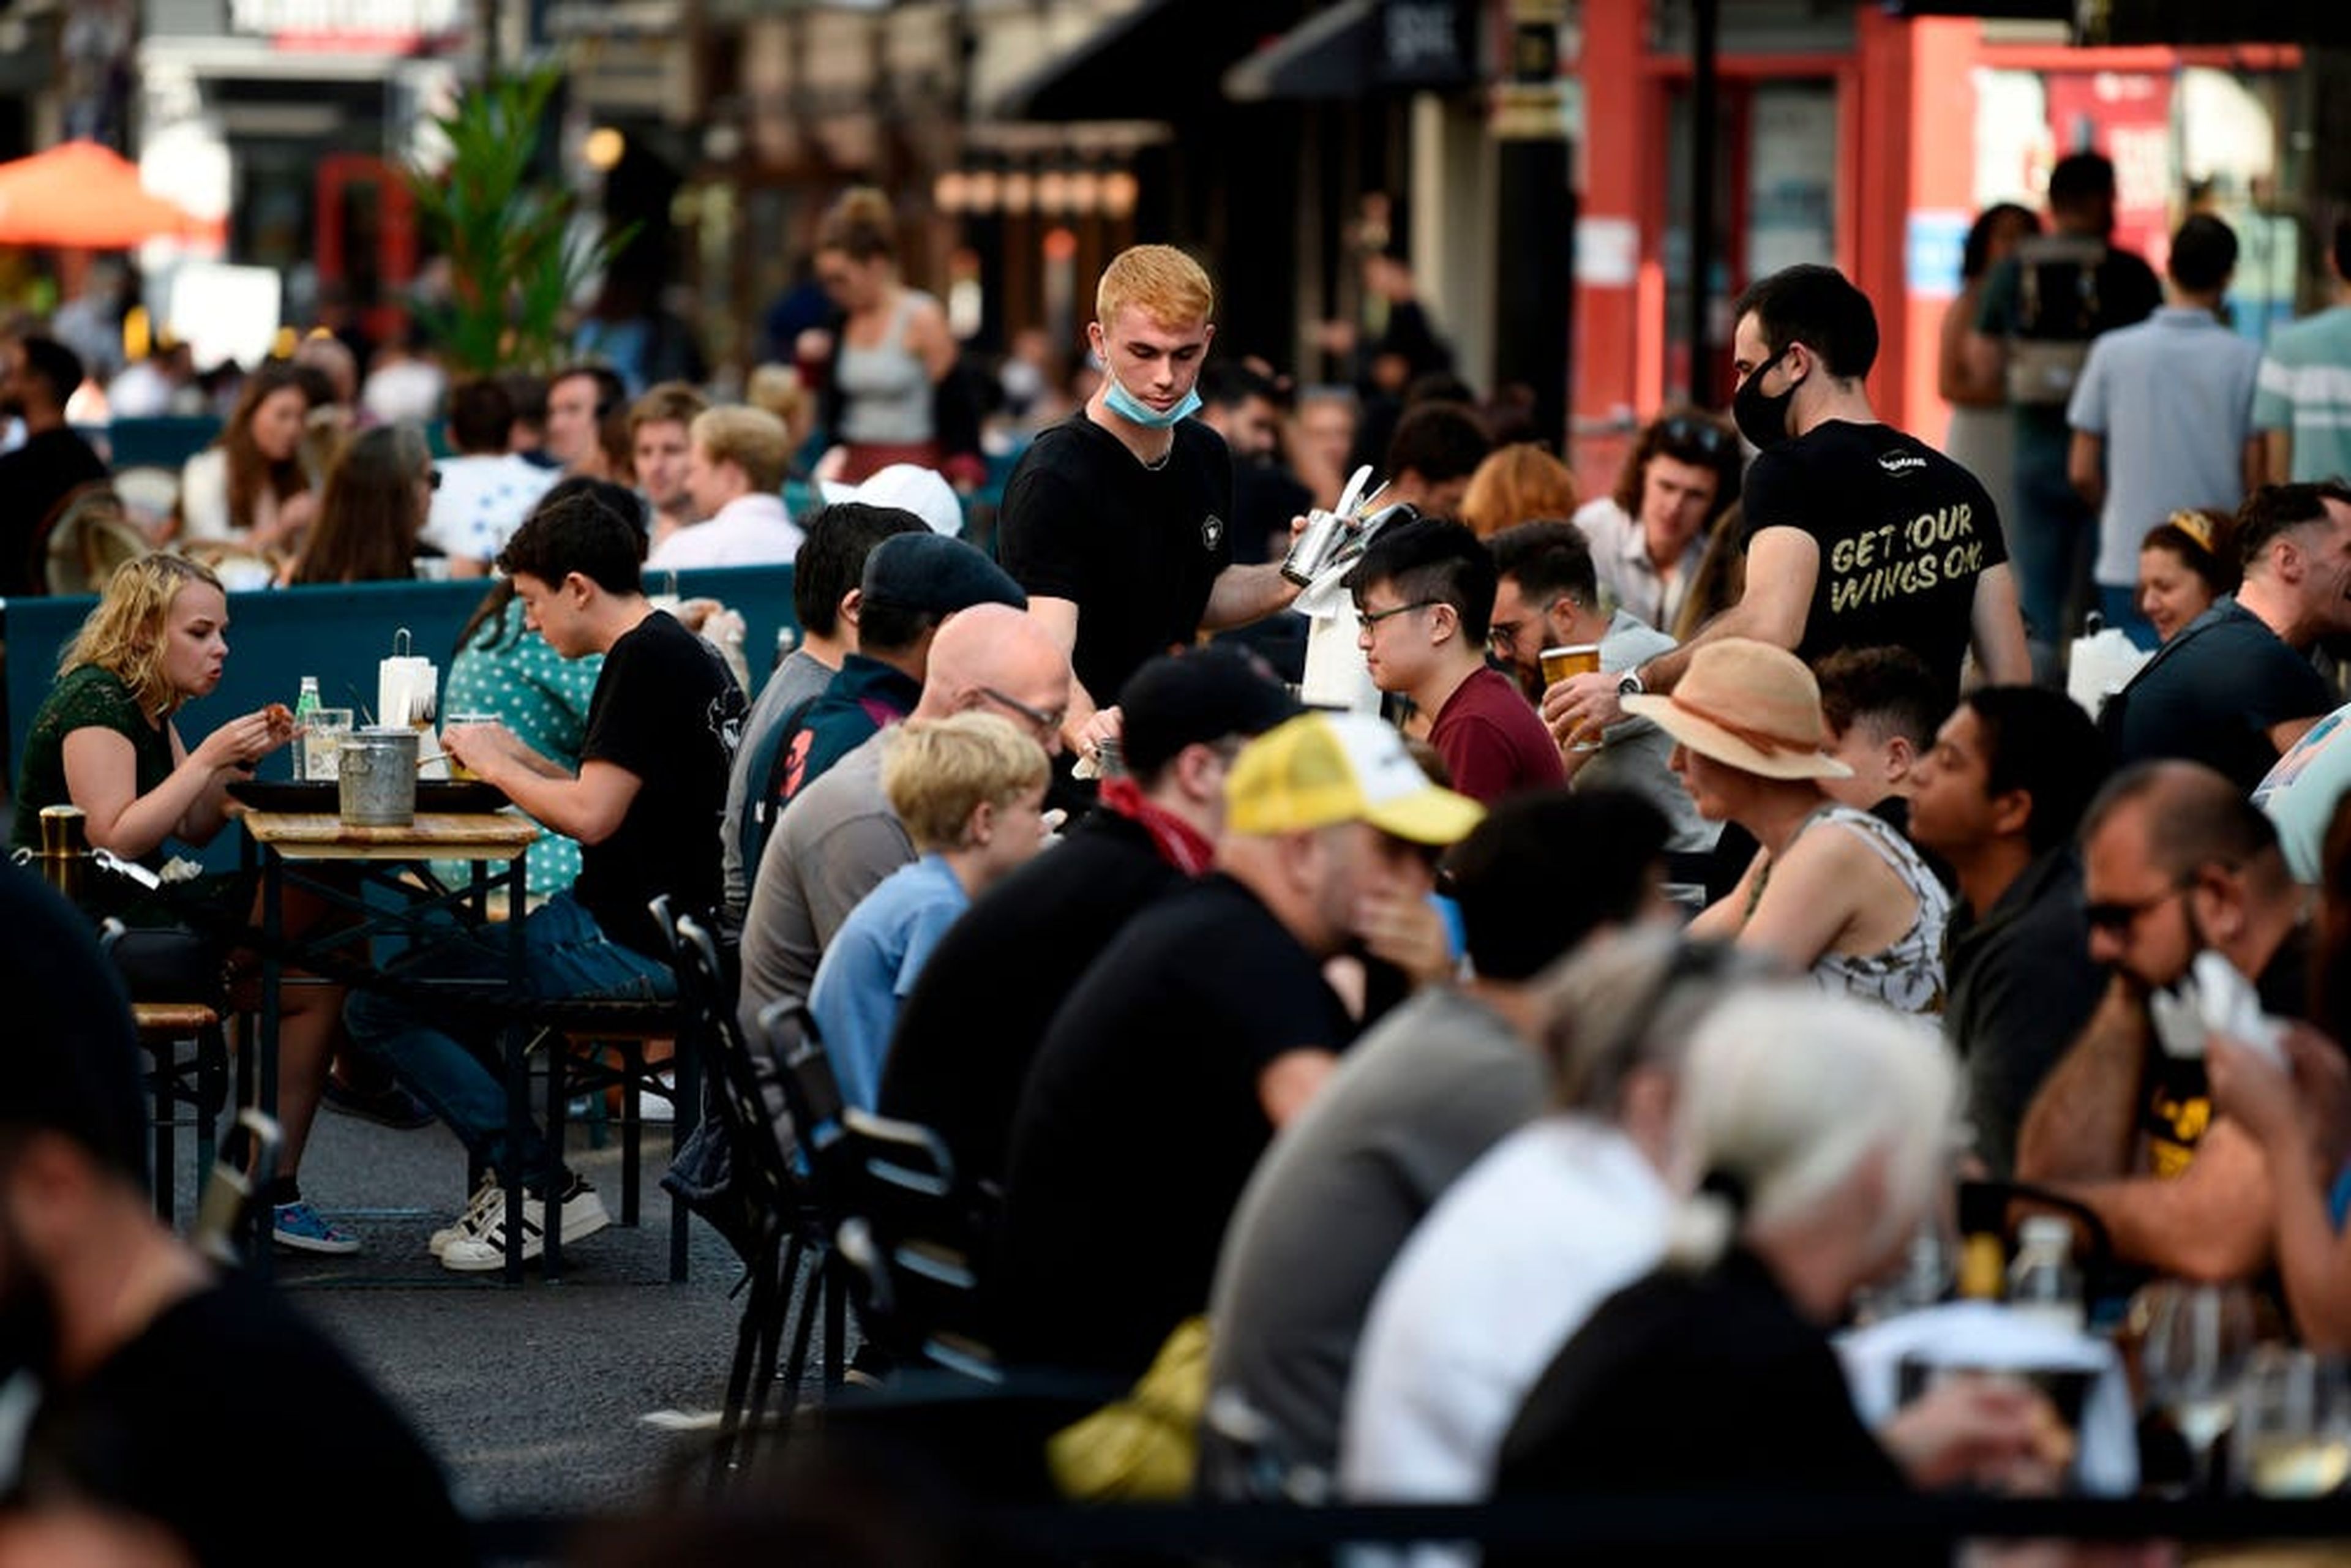 Customers eat lunch at tables outside restaurants in London, England, September 20, 2020.